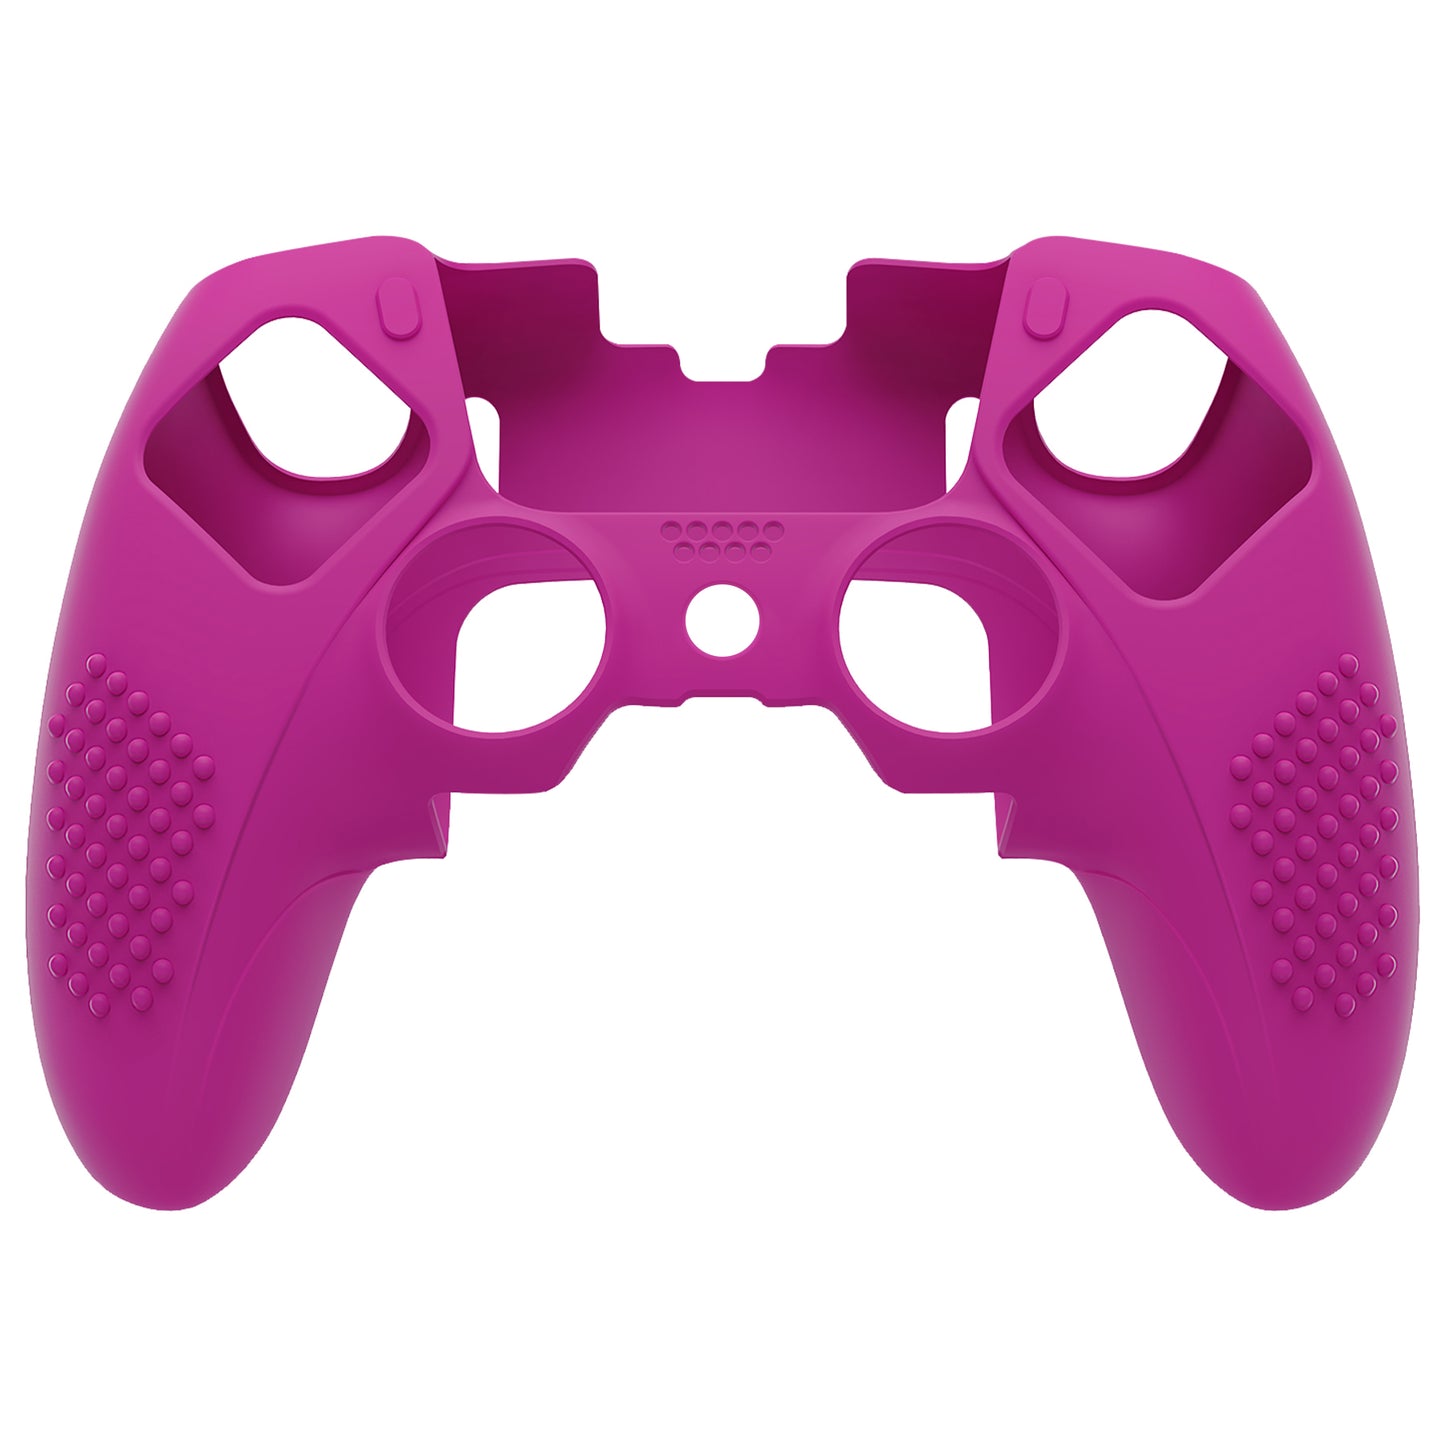 PlayVital 3D Studded Edition Anti-Slip Silicone Cover Case with Thumb Grip Caps for PS5 Edge Controller - Neon Purple - ETPFP017 PlayVital